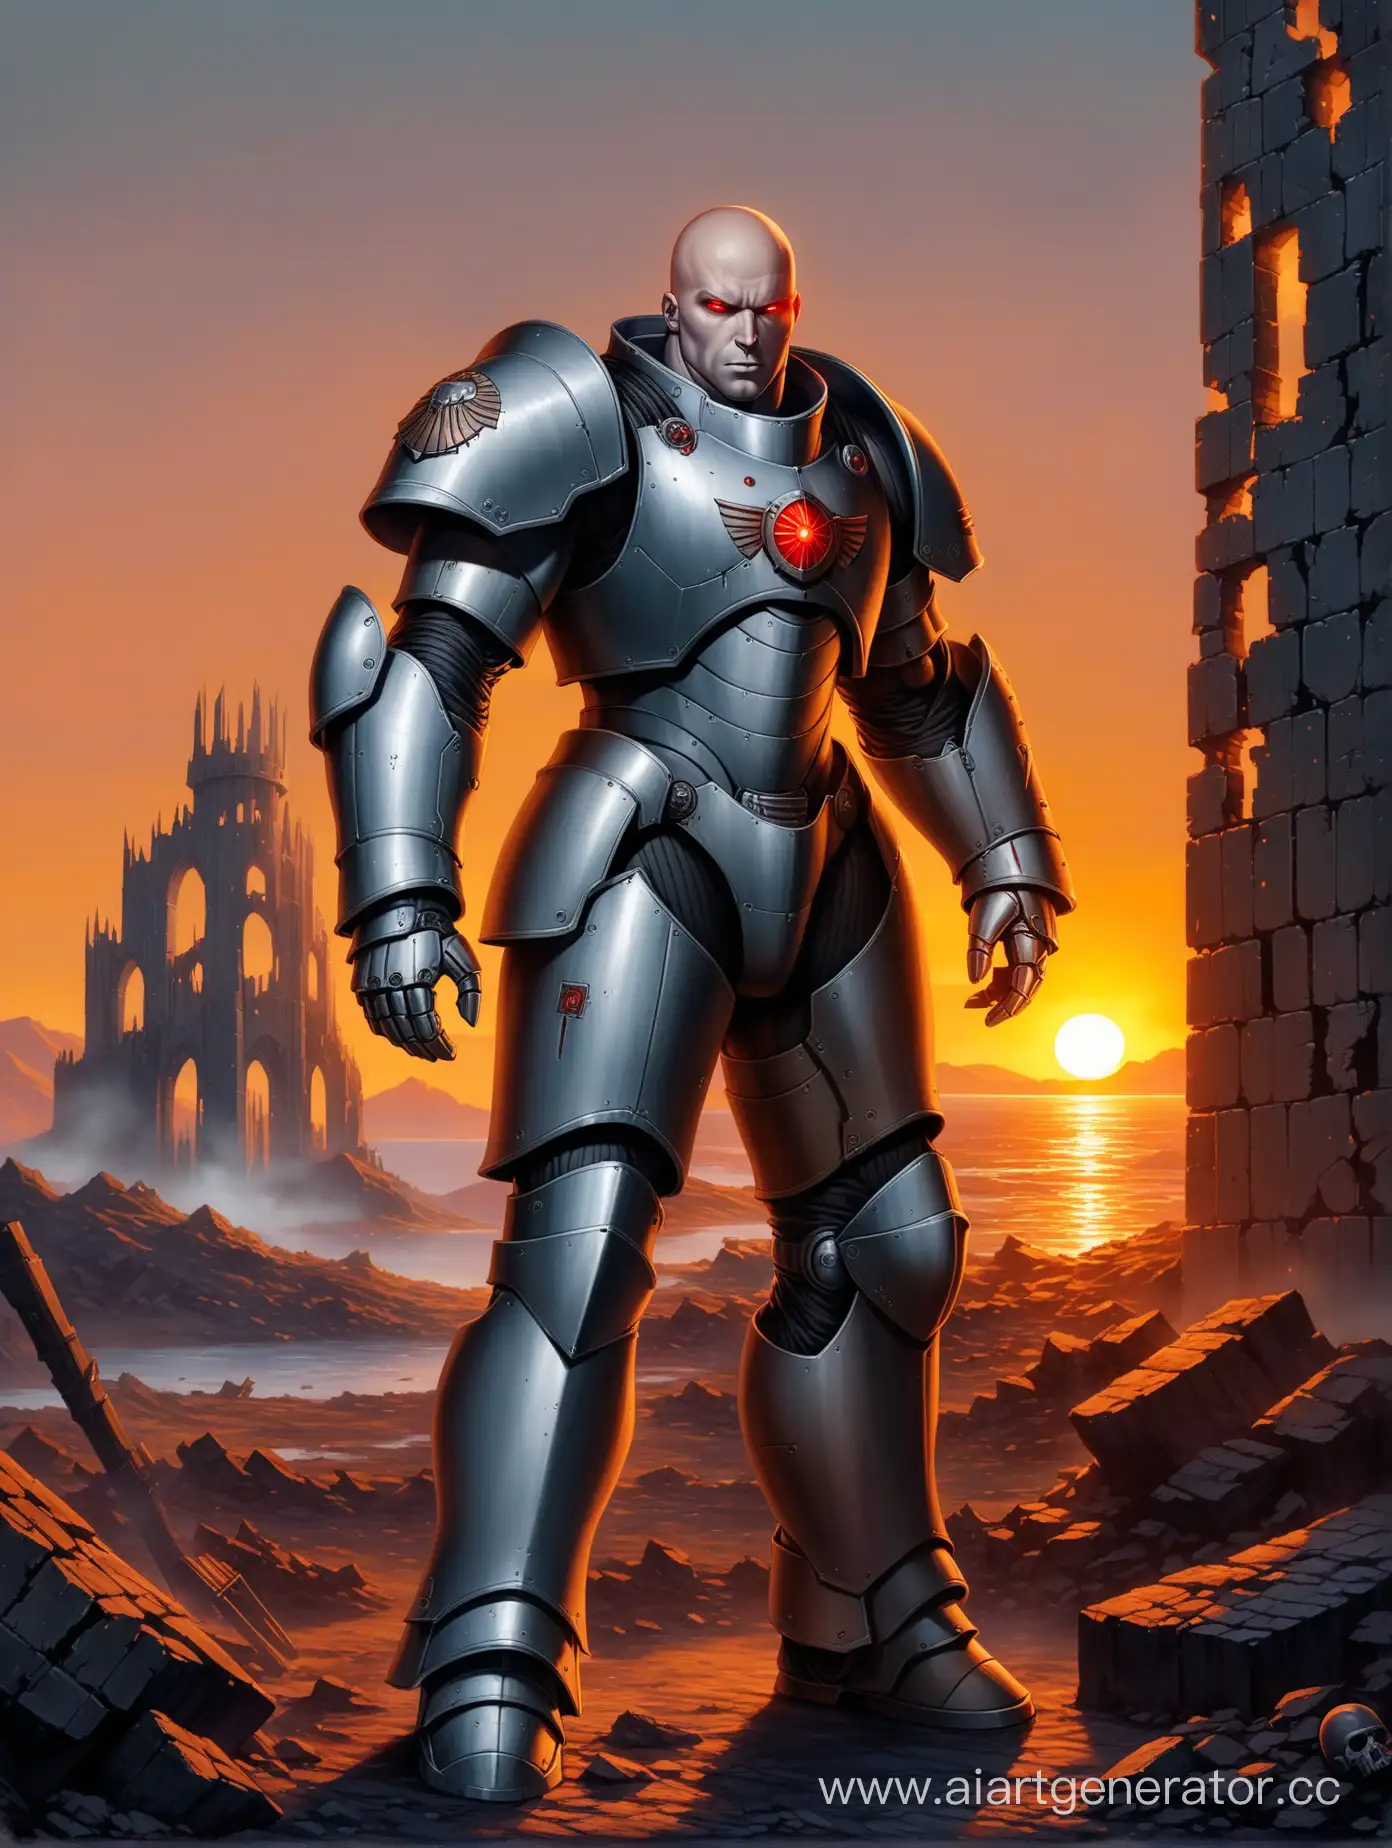 Ultramuscular man in realistic style similar to space marine. red eyes, bald augmented head. Full 3 meters body image. Wearing a sci-fi medieval grey coloured power armour, no skull images. Stands in fantasy ruins at the sunset.